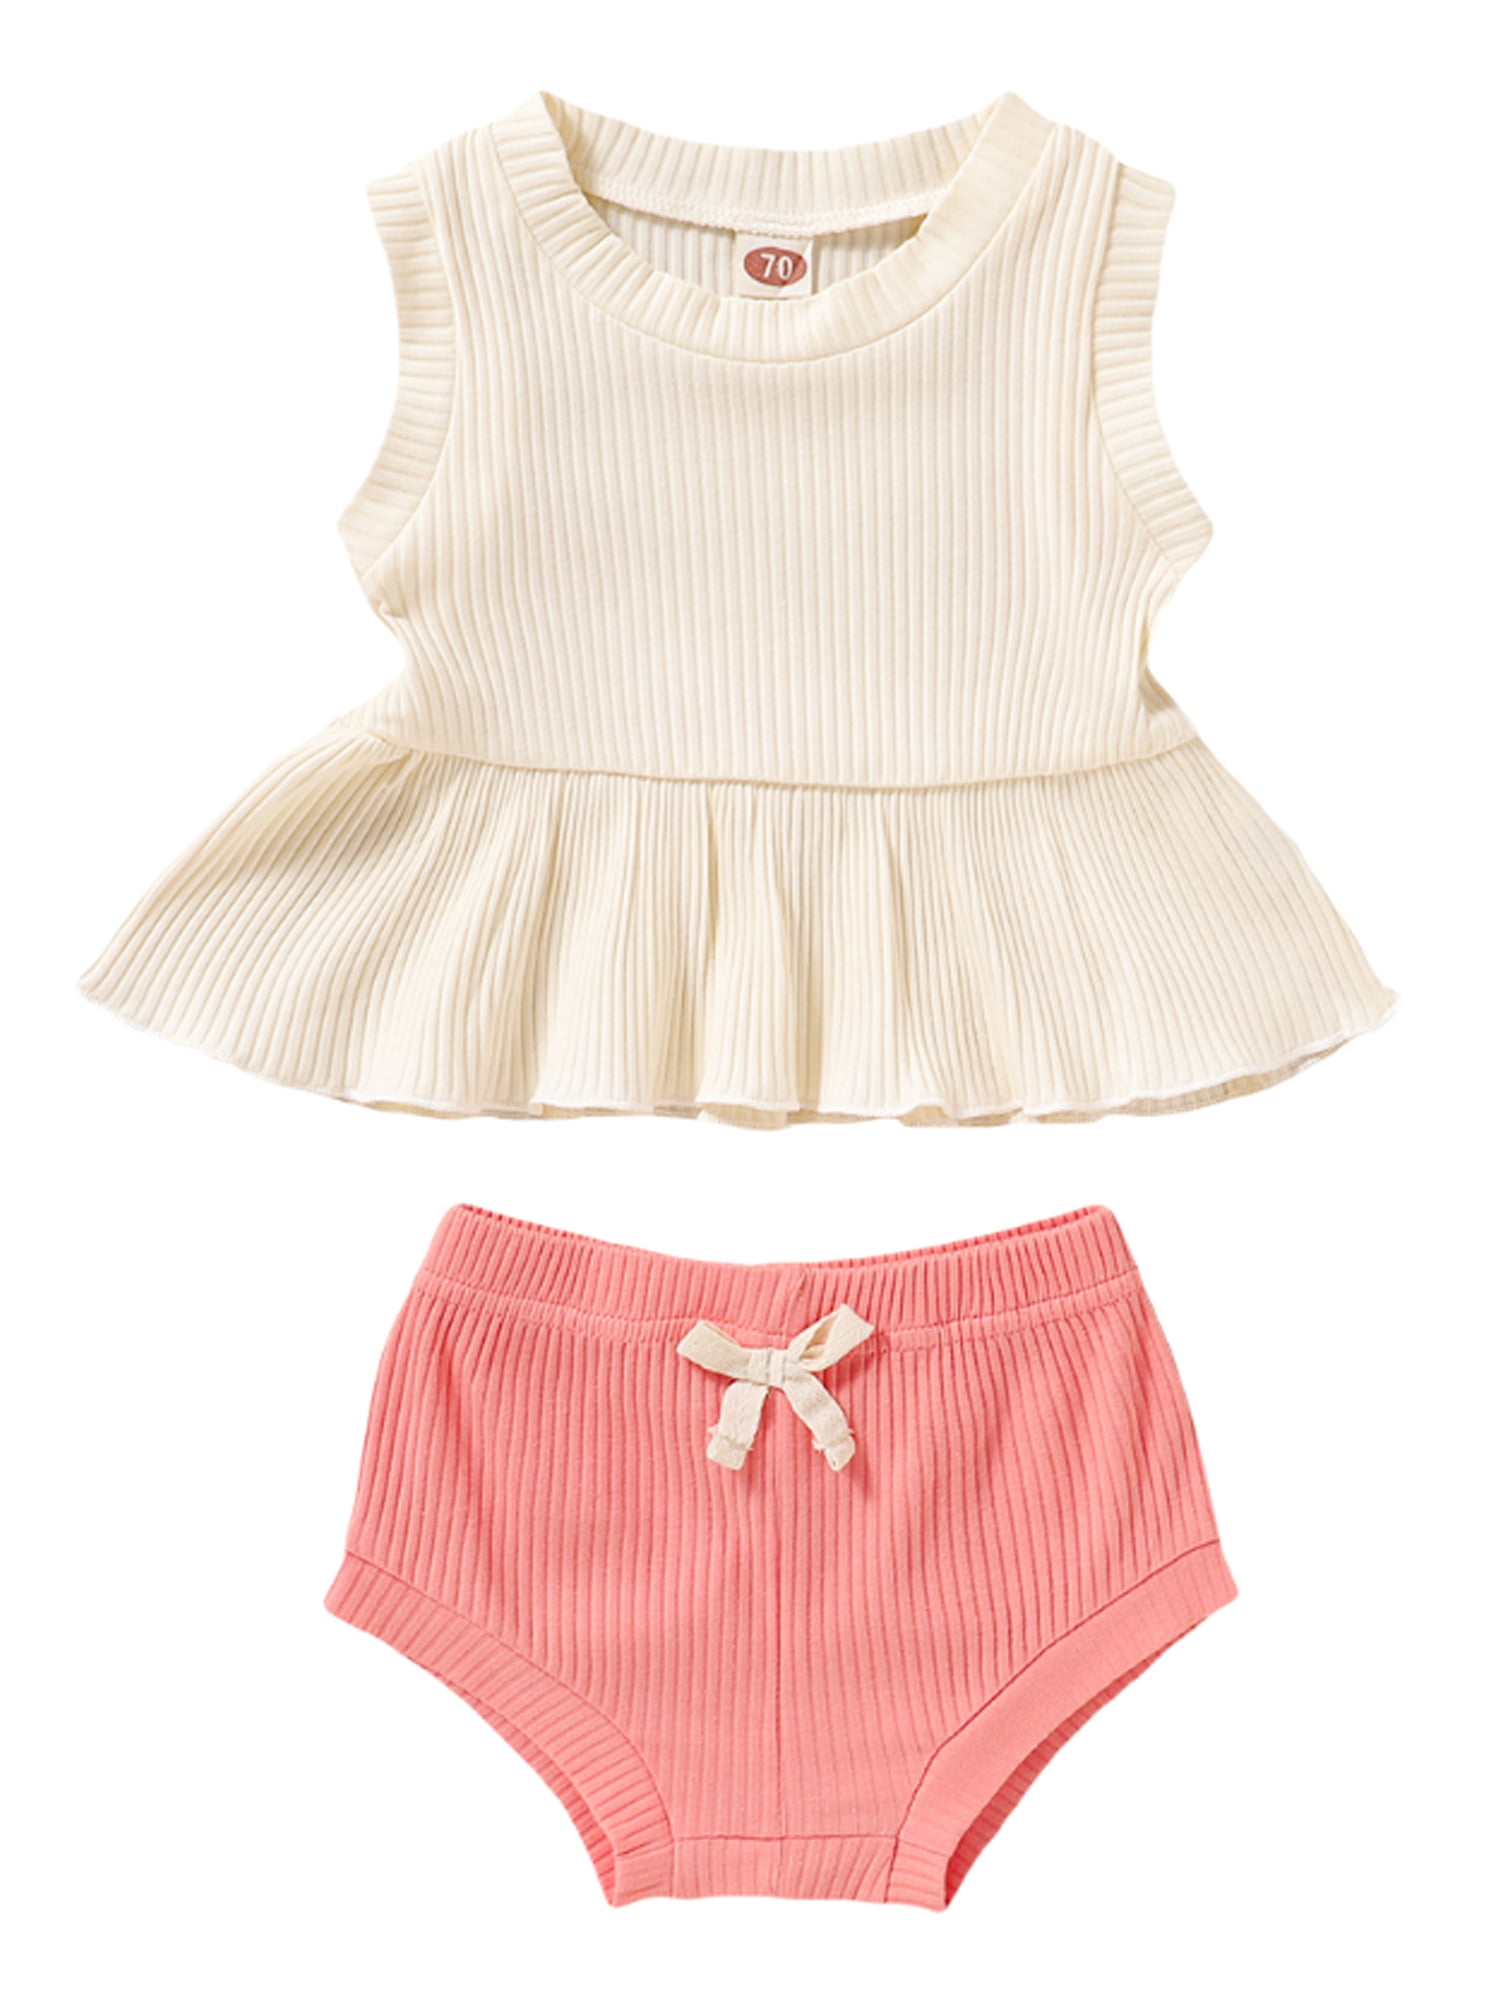 Details about   Cute Baby Girl Newborn Ruffle Pants Shorts Bloomers 